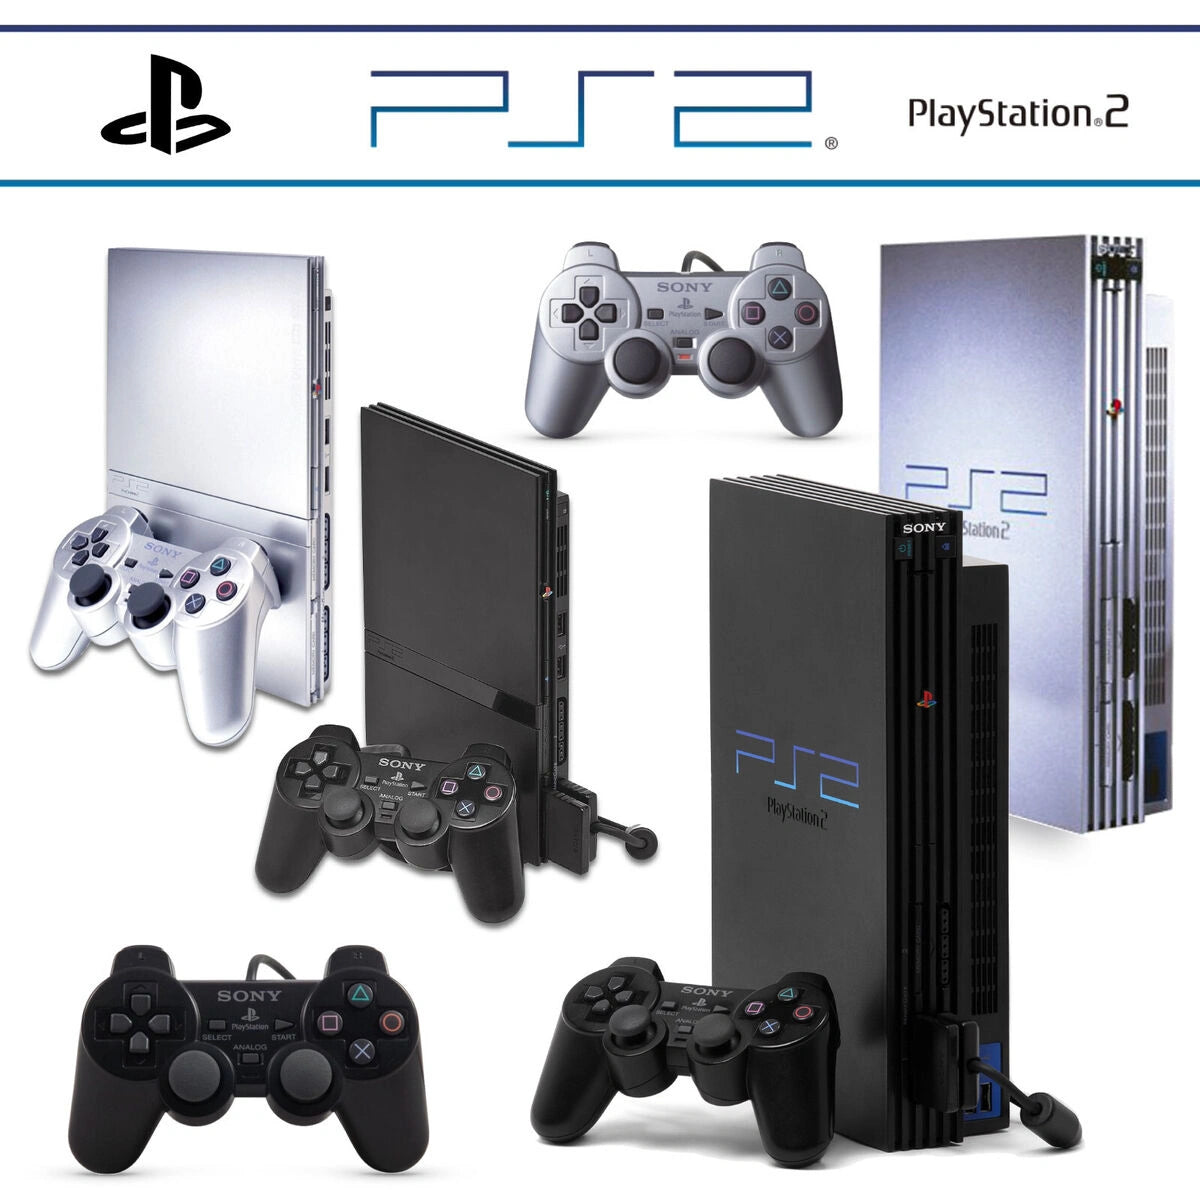 Ultimate Guide to the Best PS2 Games and Accessories